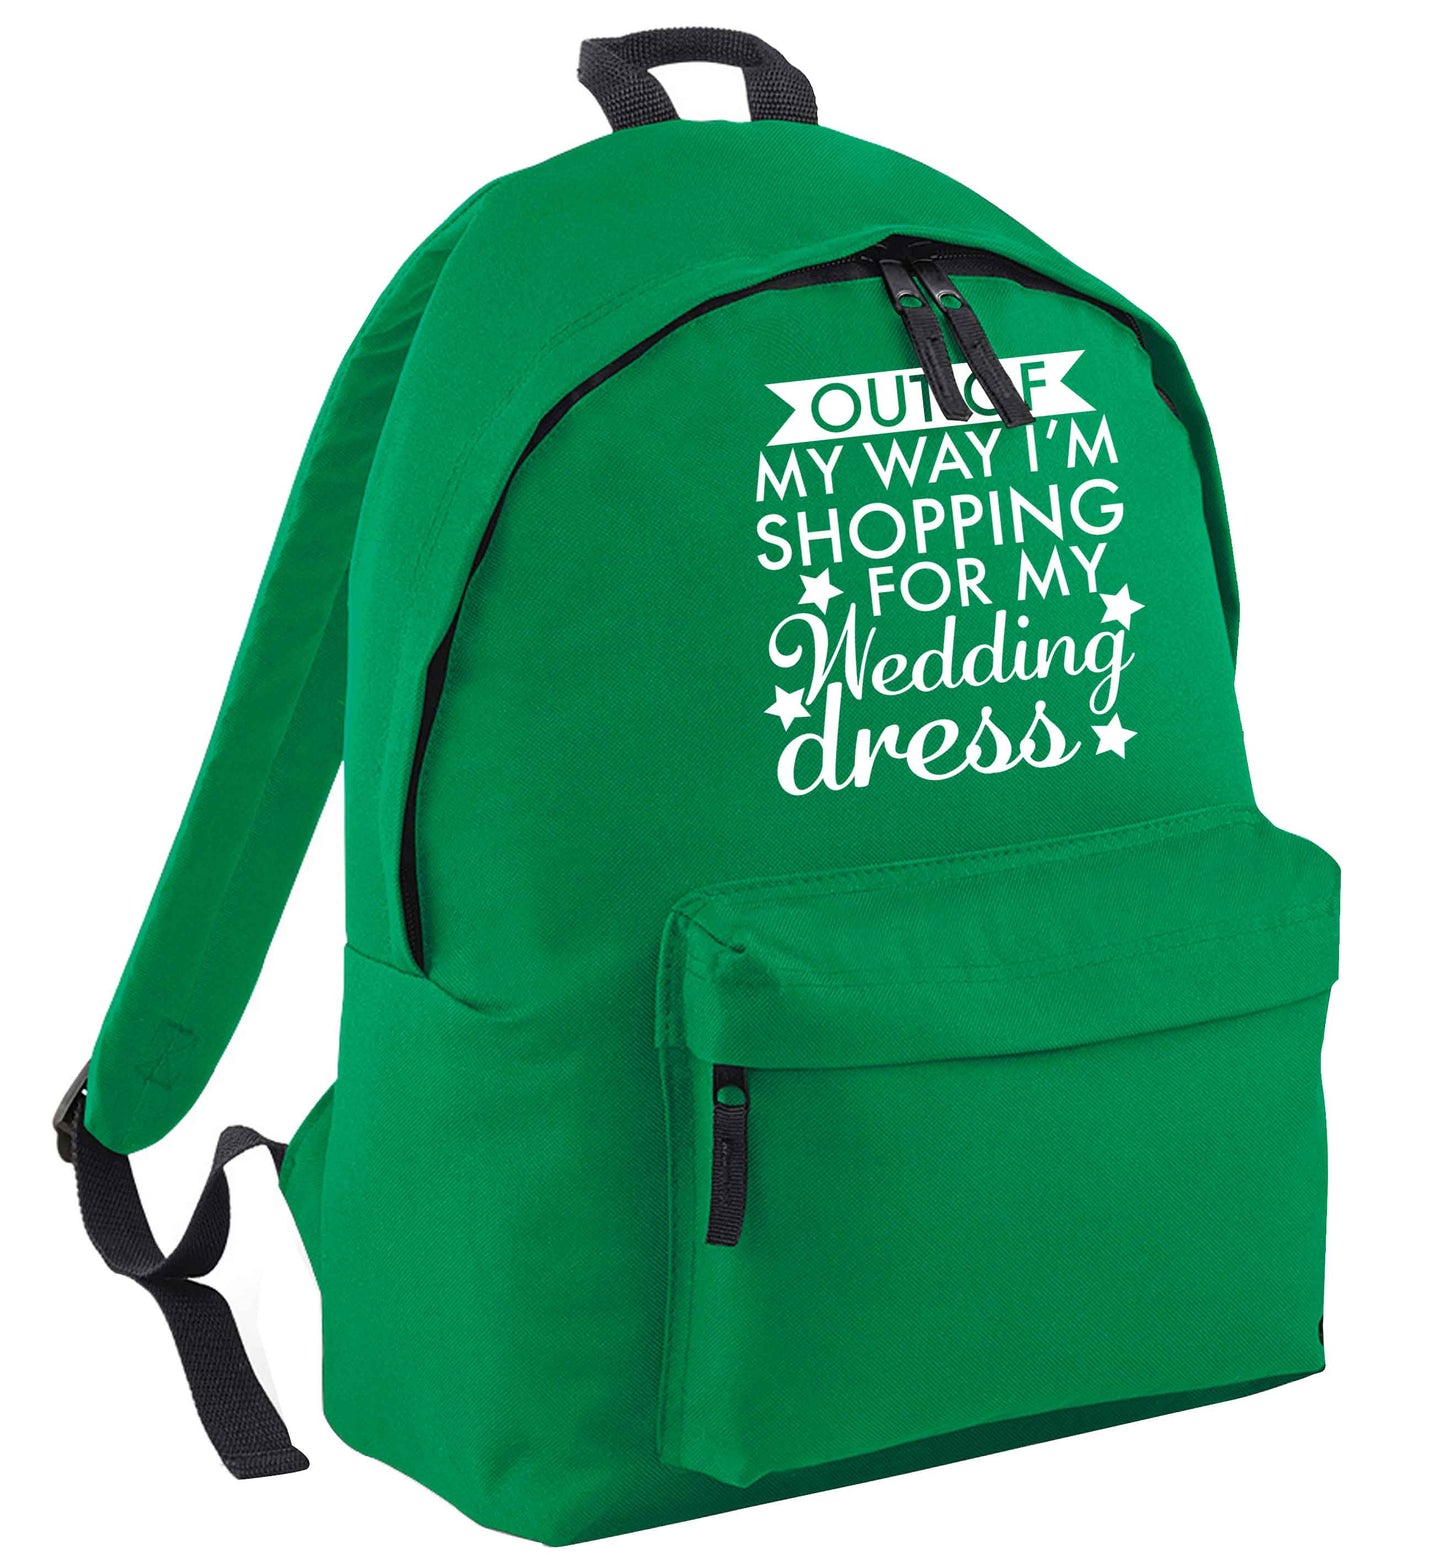 Out of my way I'm shopping for my wedding dress green adults backpack